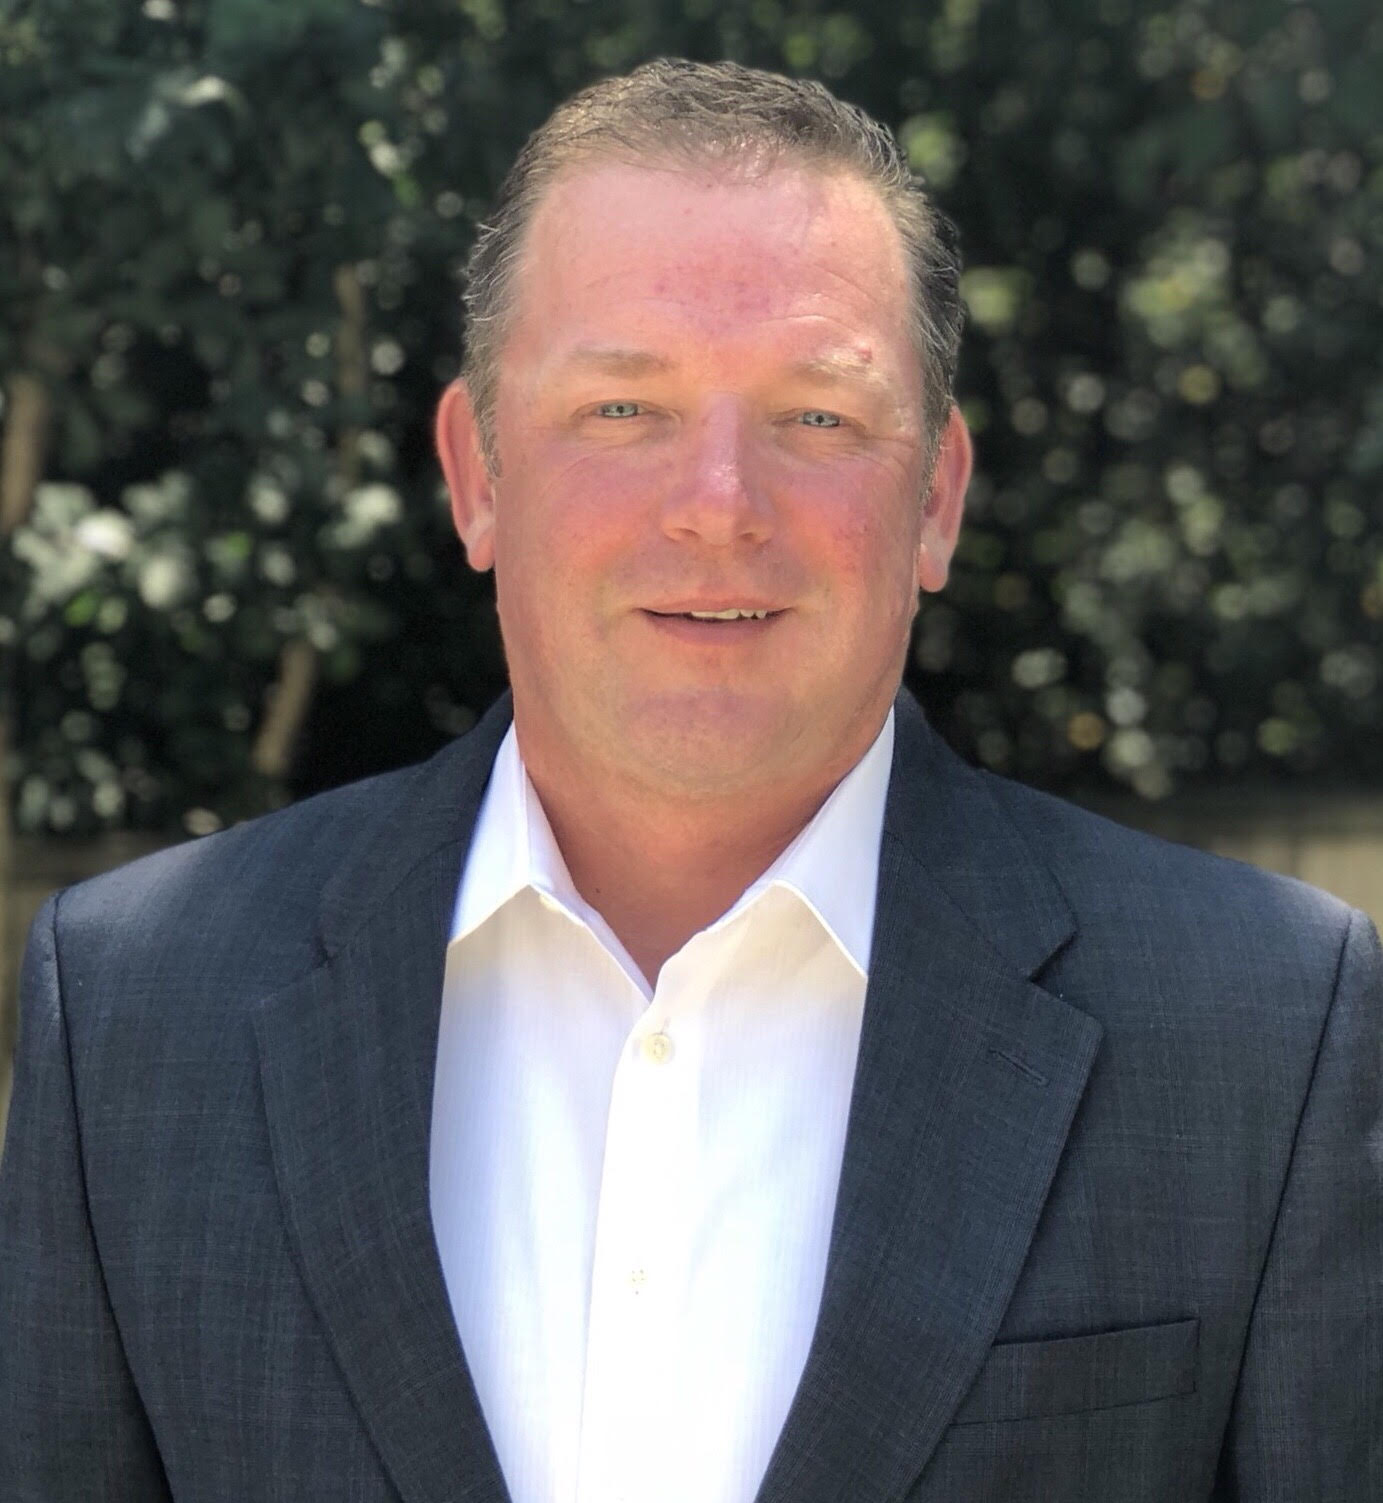 R. Bryan Wright is regional manager of Union Home Mortgage in Fayetteville, N.C., and 2018-2019 president of the Mortgage Bankers Association of the Carolinas